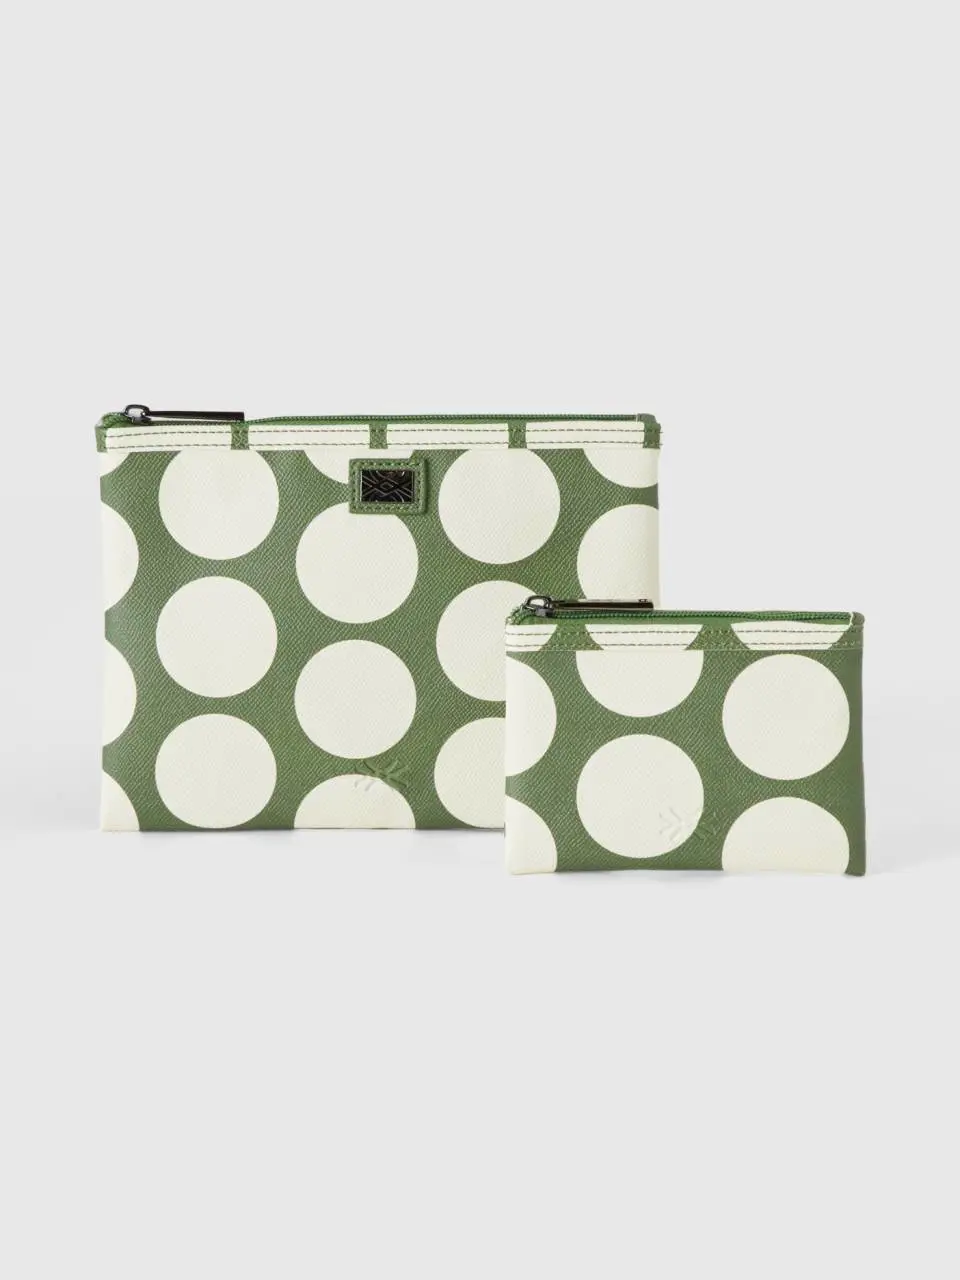 Benetton two green bags with white polka dots. 1